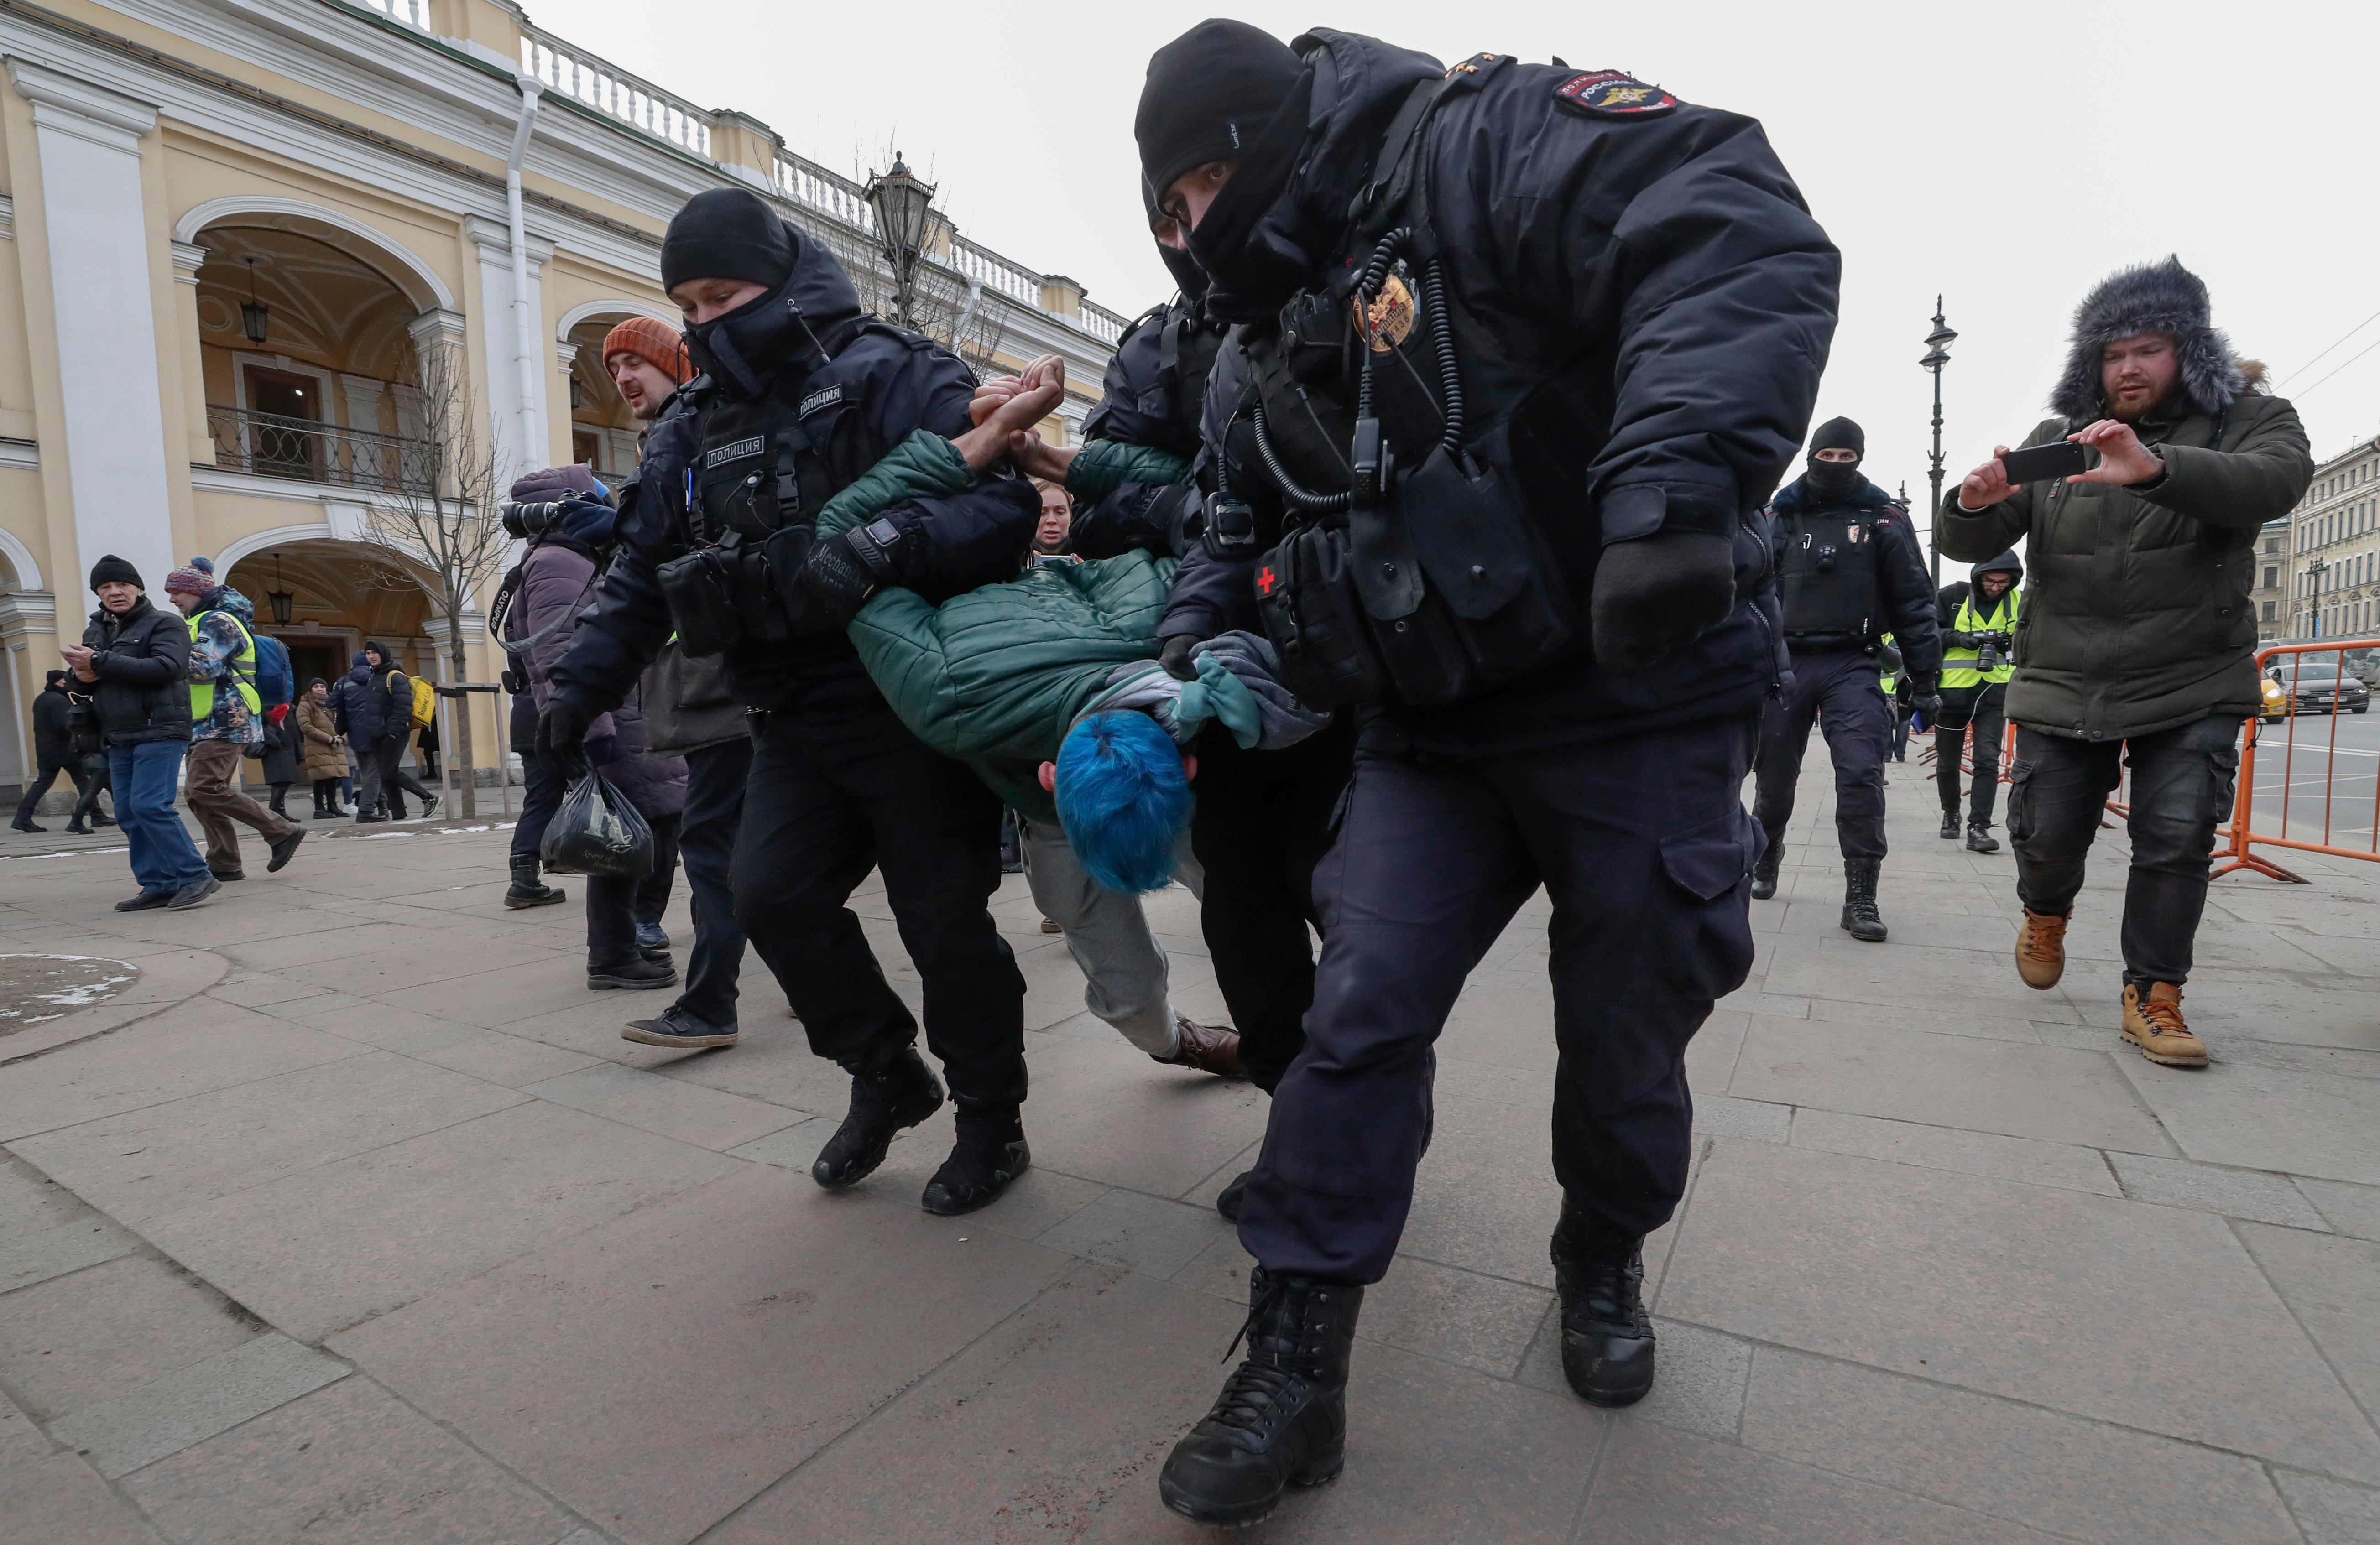 An anti-war demonstrator is detained in St Petersburg, Russia, on 8 March